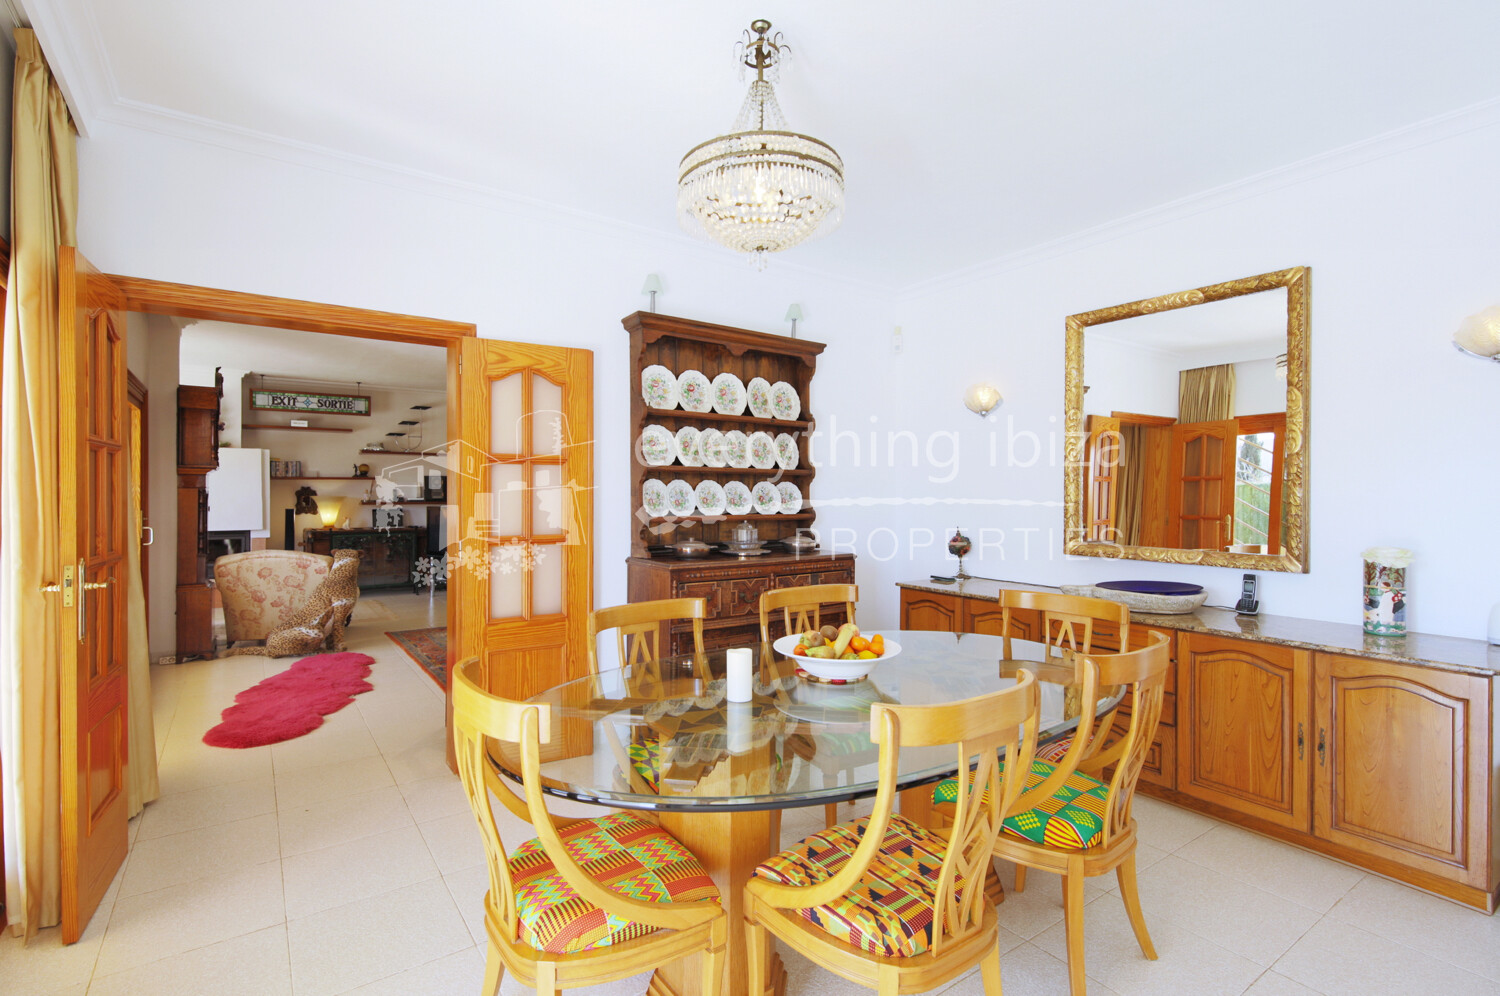 Elegant Villa with Two Independent Apartments San Jordi, ref. 1654, for sale in Ibiza by everything ibiza Properties